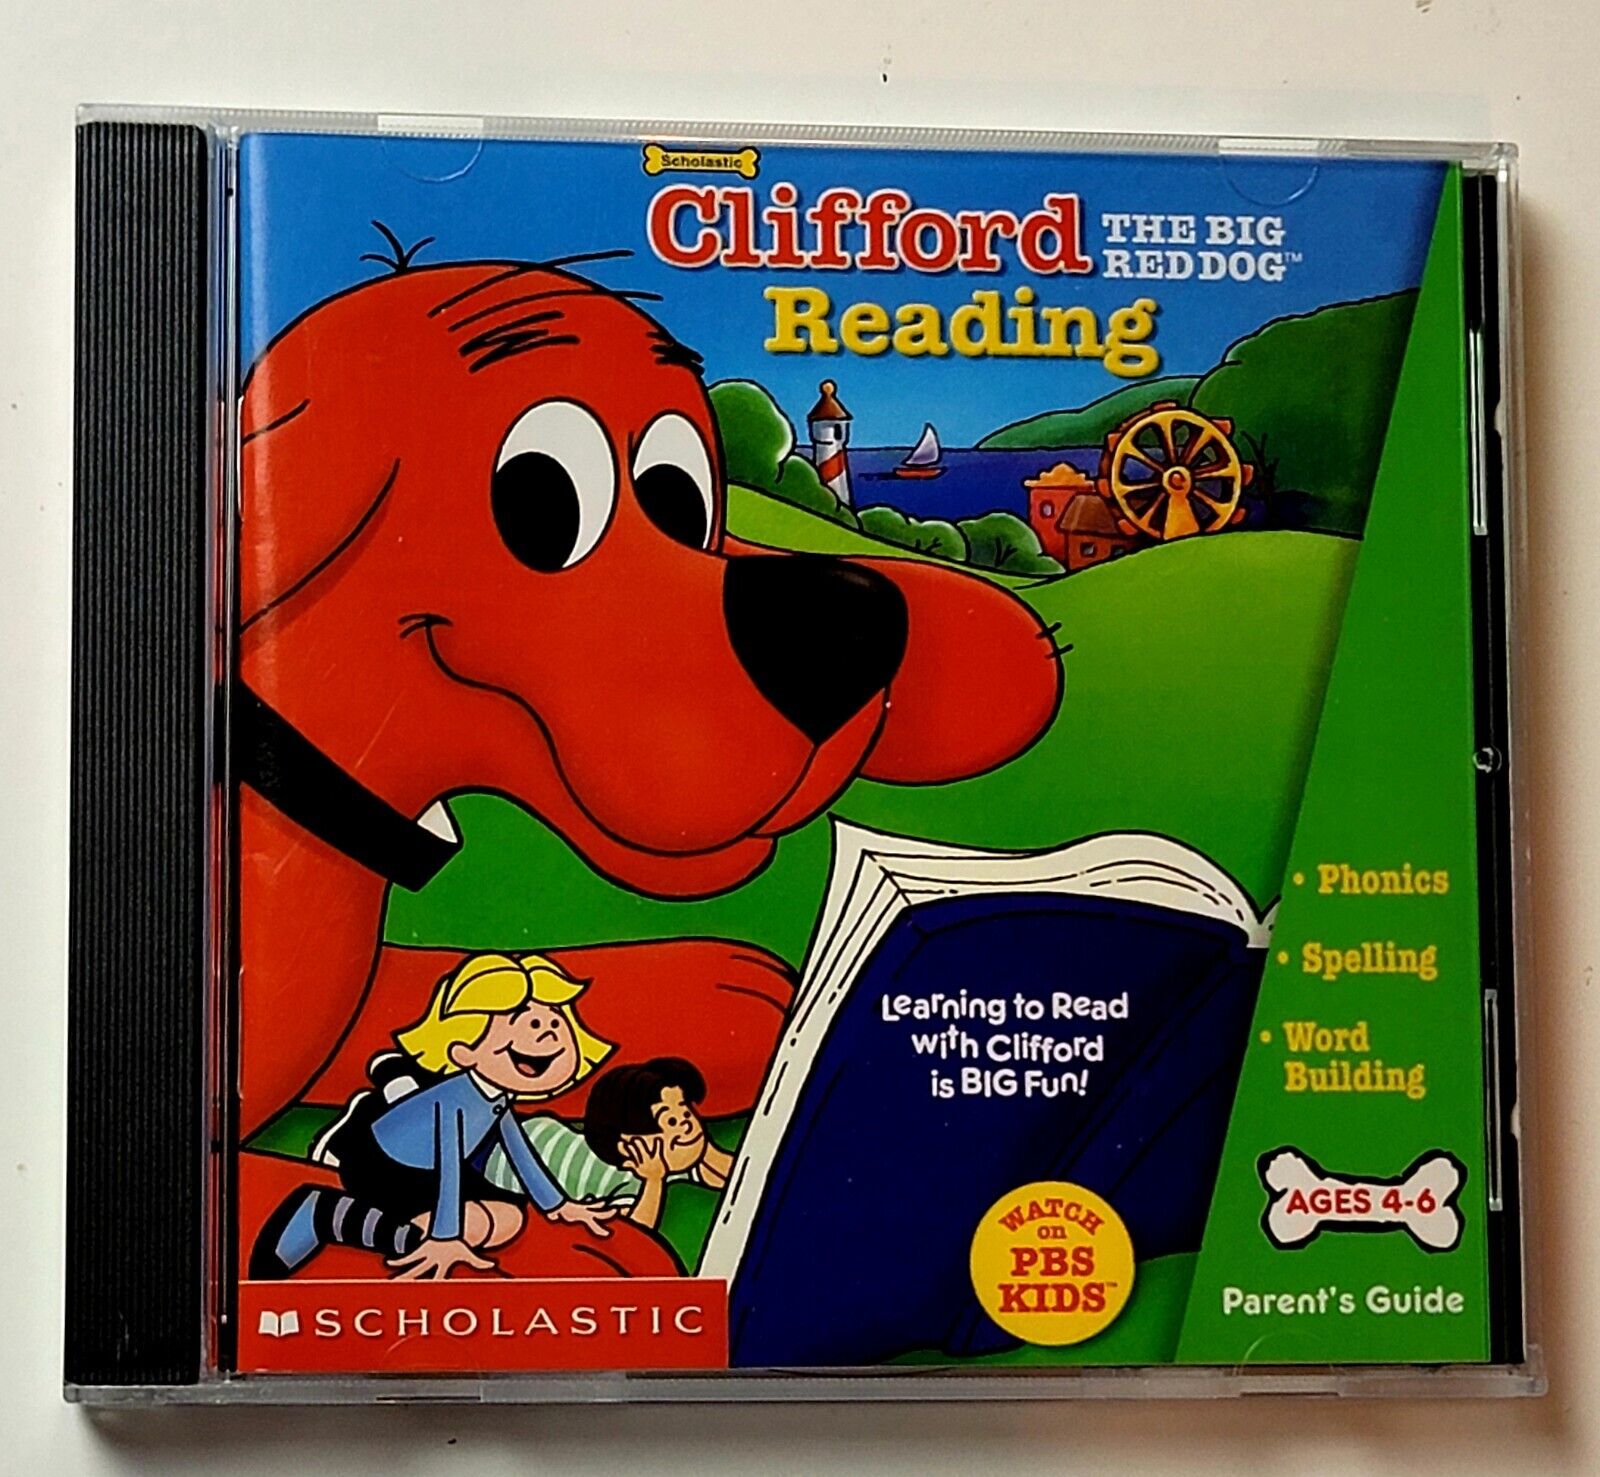 Scholastic Clifford The Big Red Dog Reading for PC, Mac